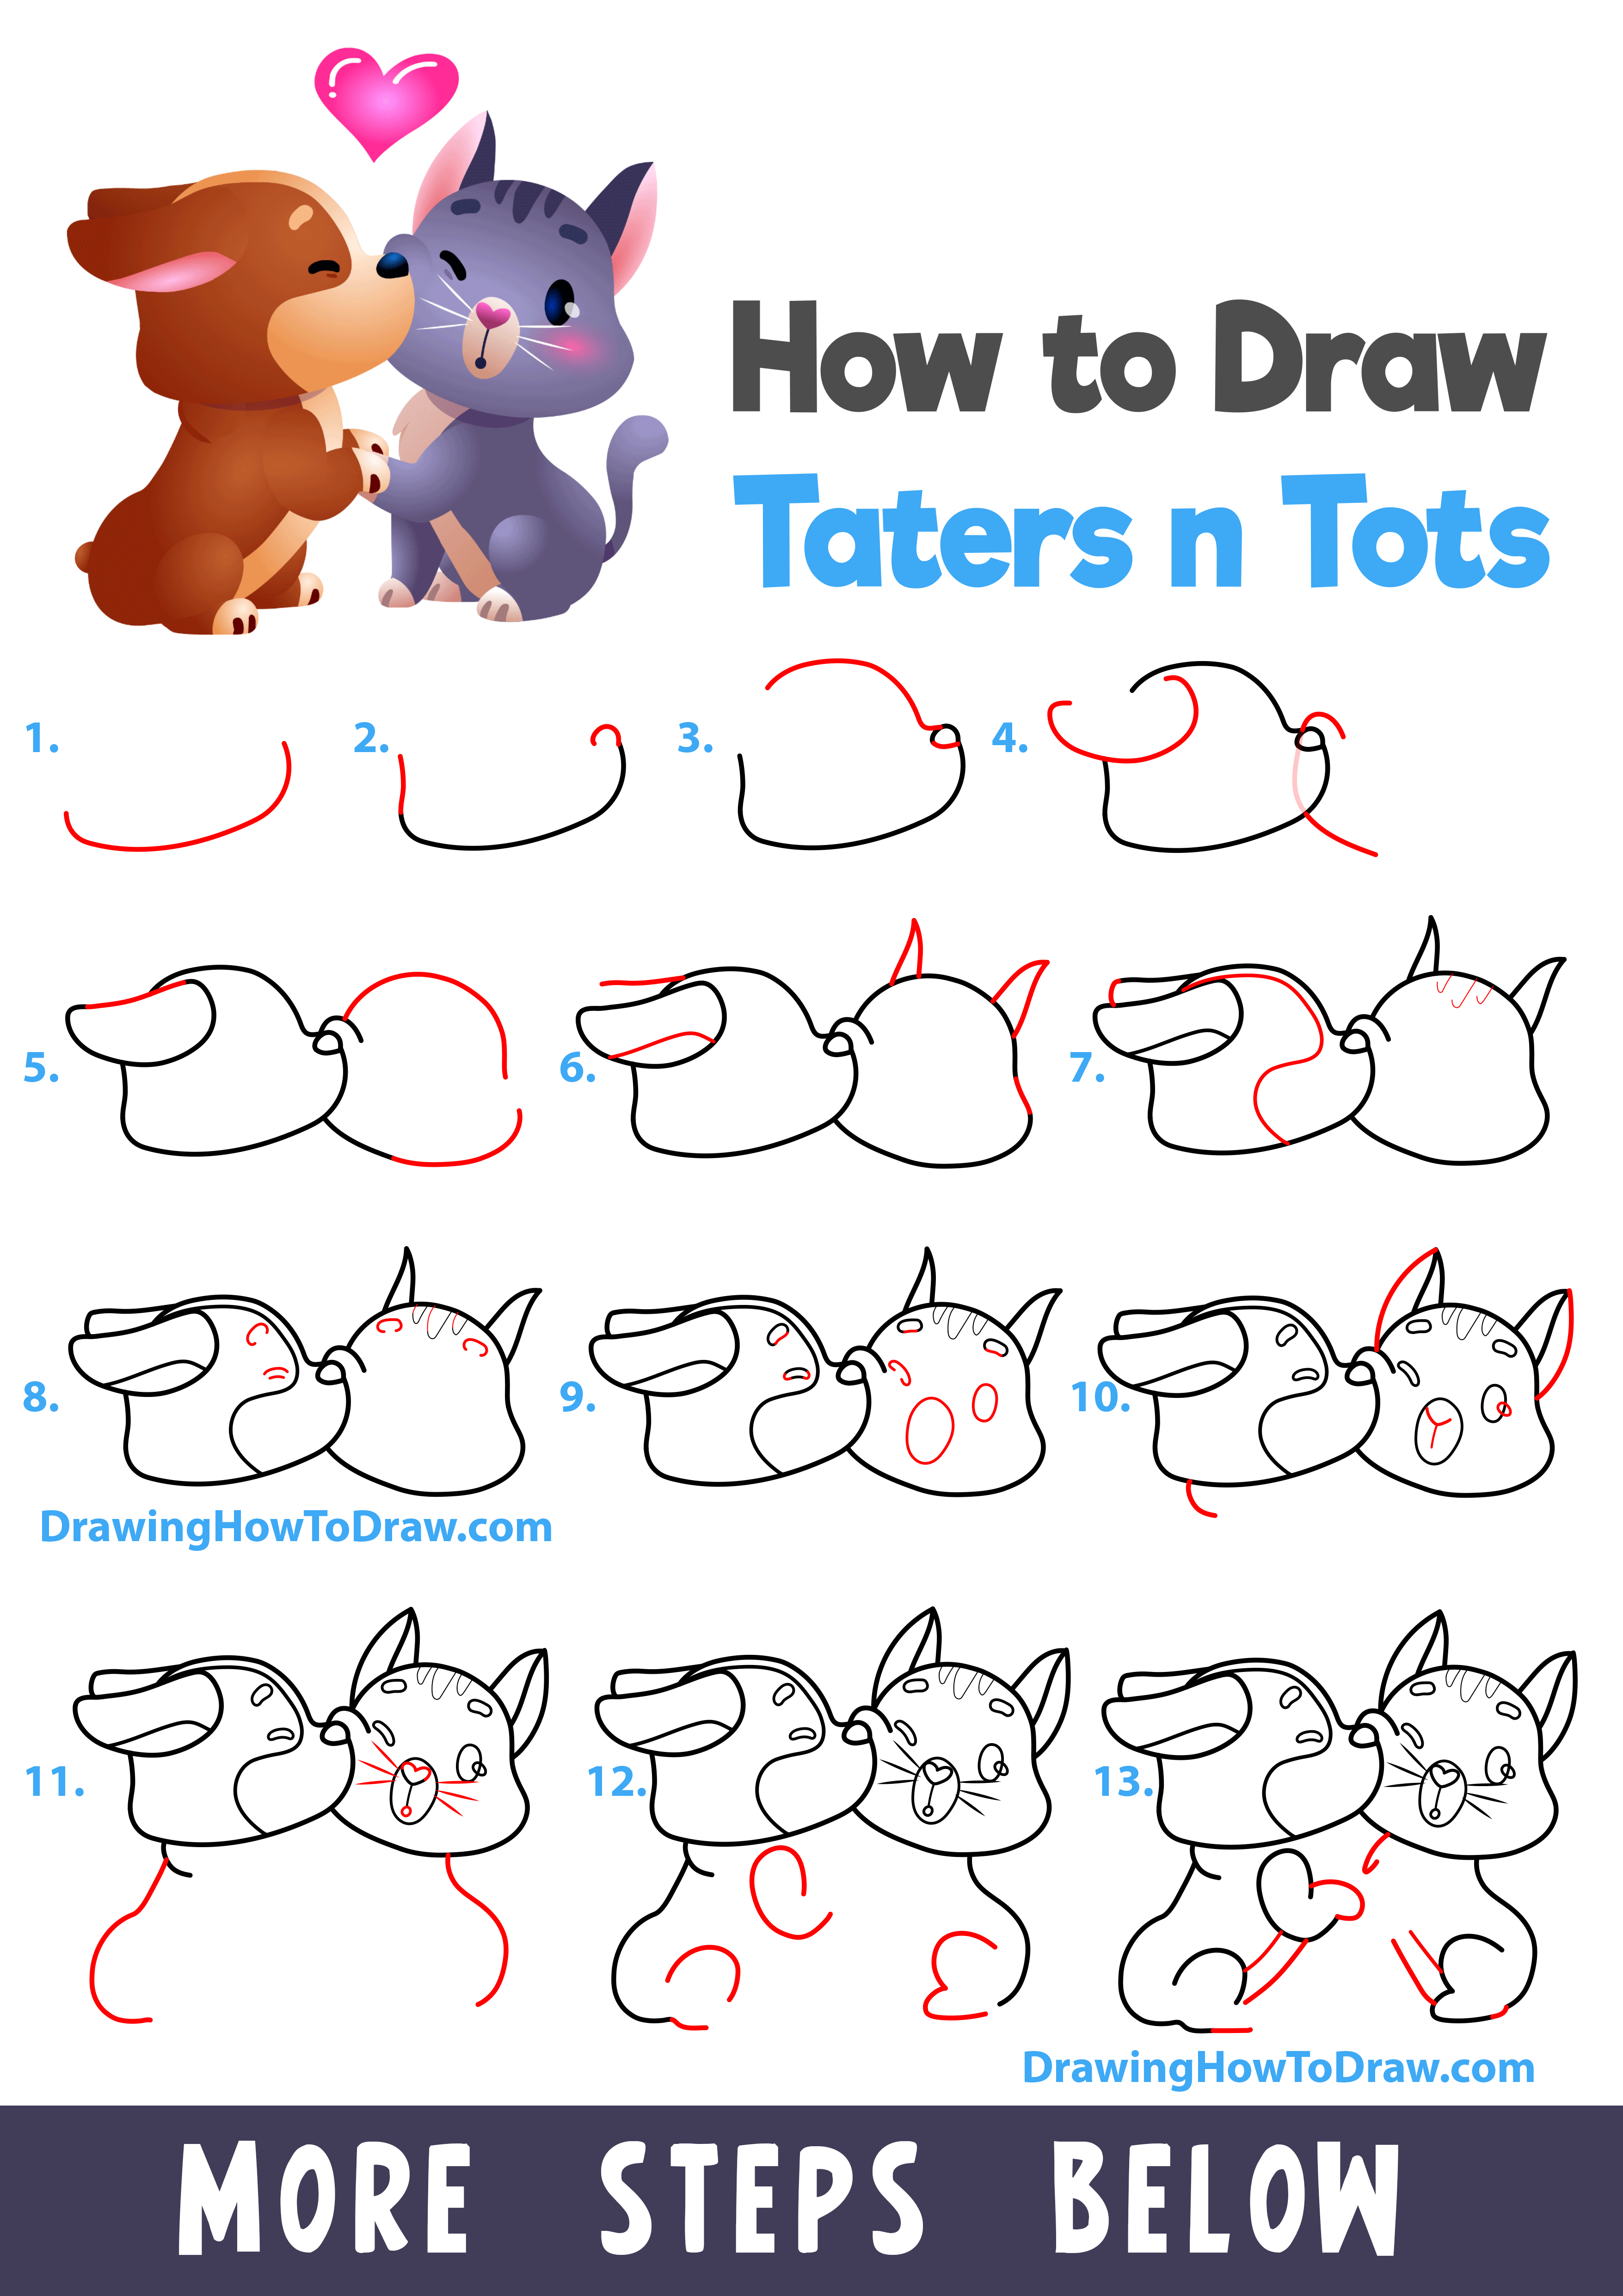 How to Draw a Cute Kawaii Chibi Dog & Cat Kissing (Taters N Tots) Easy Step-by-Step Drawing Tutorial for Kids